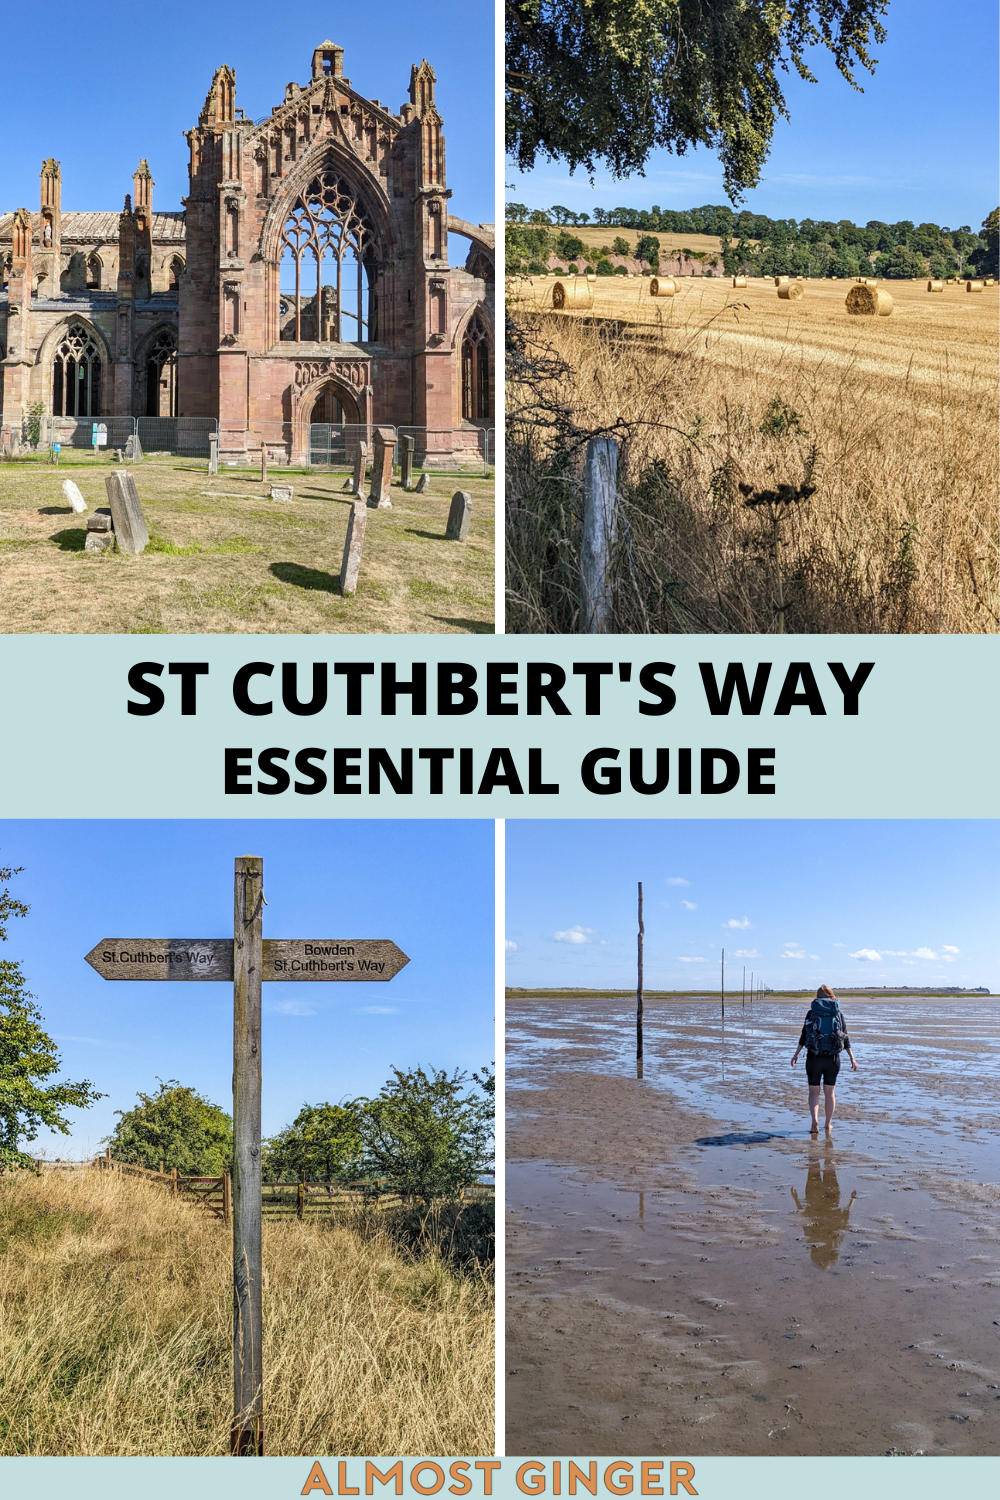 St Cuthbert's Way Walk Guide: My Experience Hiking to Lindisfarne | almostginger.com